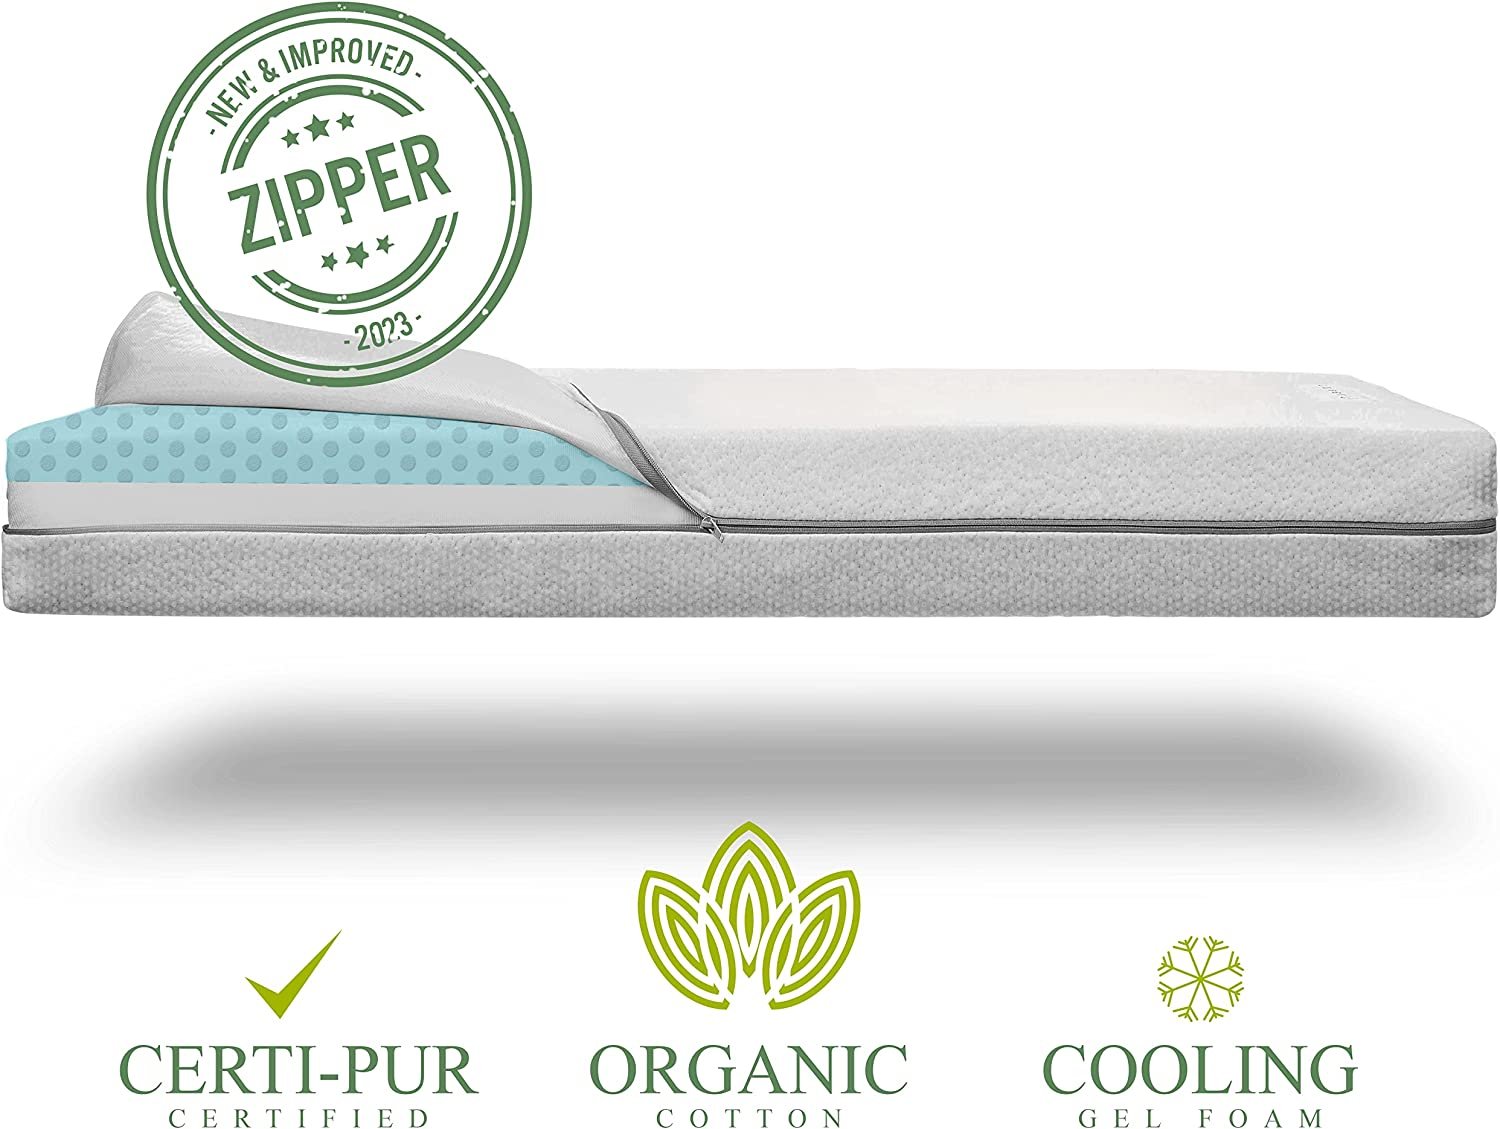 Organic Cotton Dual-Sided Crib Mattress, 2-Stage Premium Memory Foam CertiPUR-US Hypoallergenic Baby Mattress, Firm Support For infant Cooling Gel for Toddler Waterproof Washable Cover NEW ZIPPER 2023